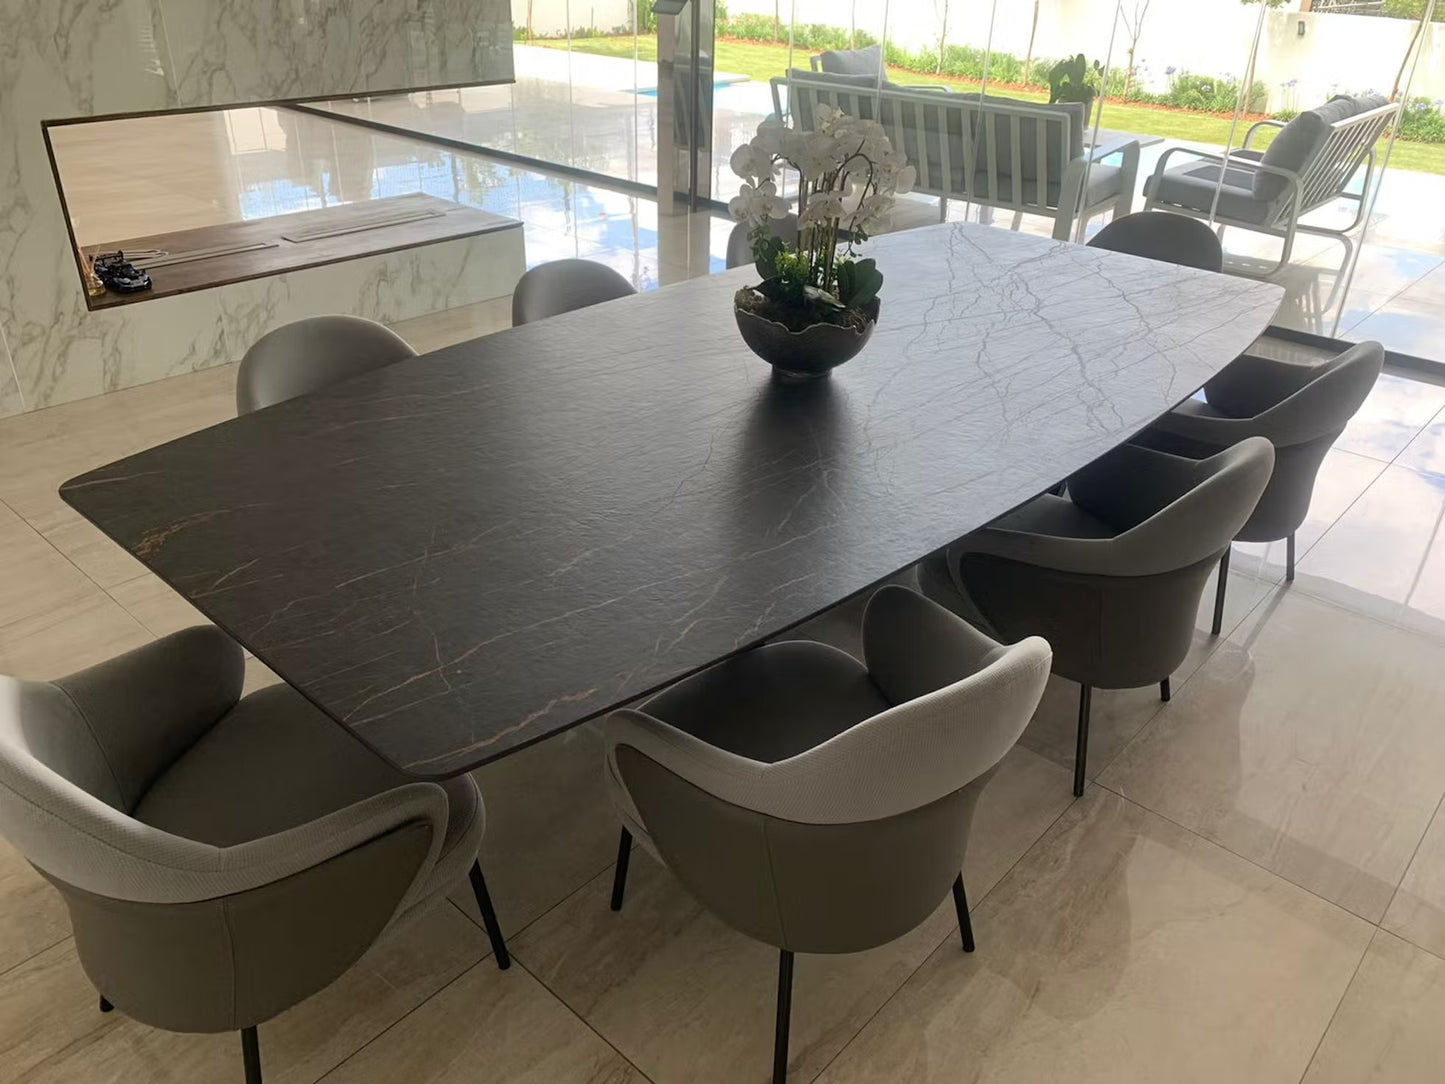 Custom-made Table with Solid Surface Materials 專業訂製餐桌 餐桌 使用耐刮耐磨廚房檯面材料